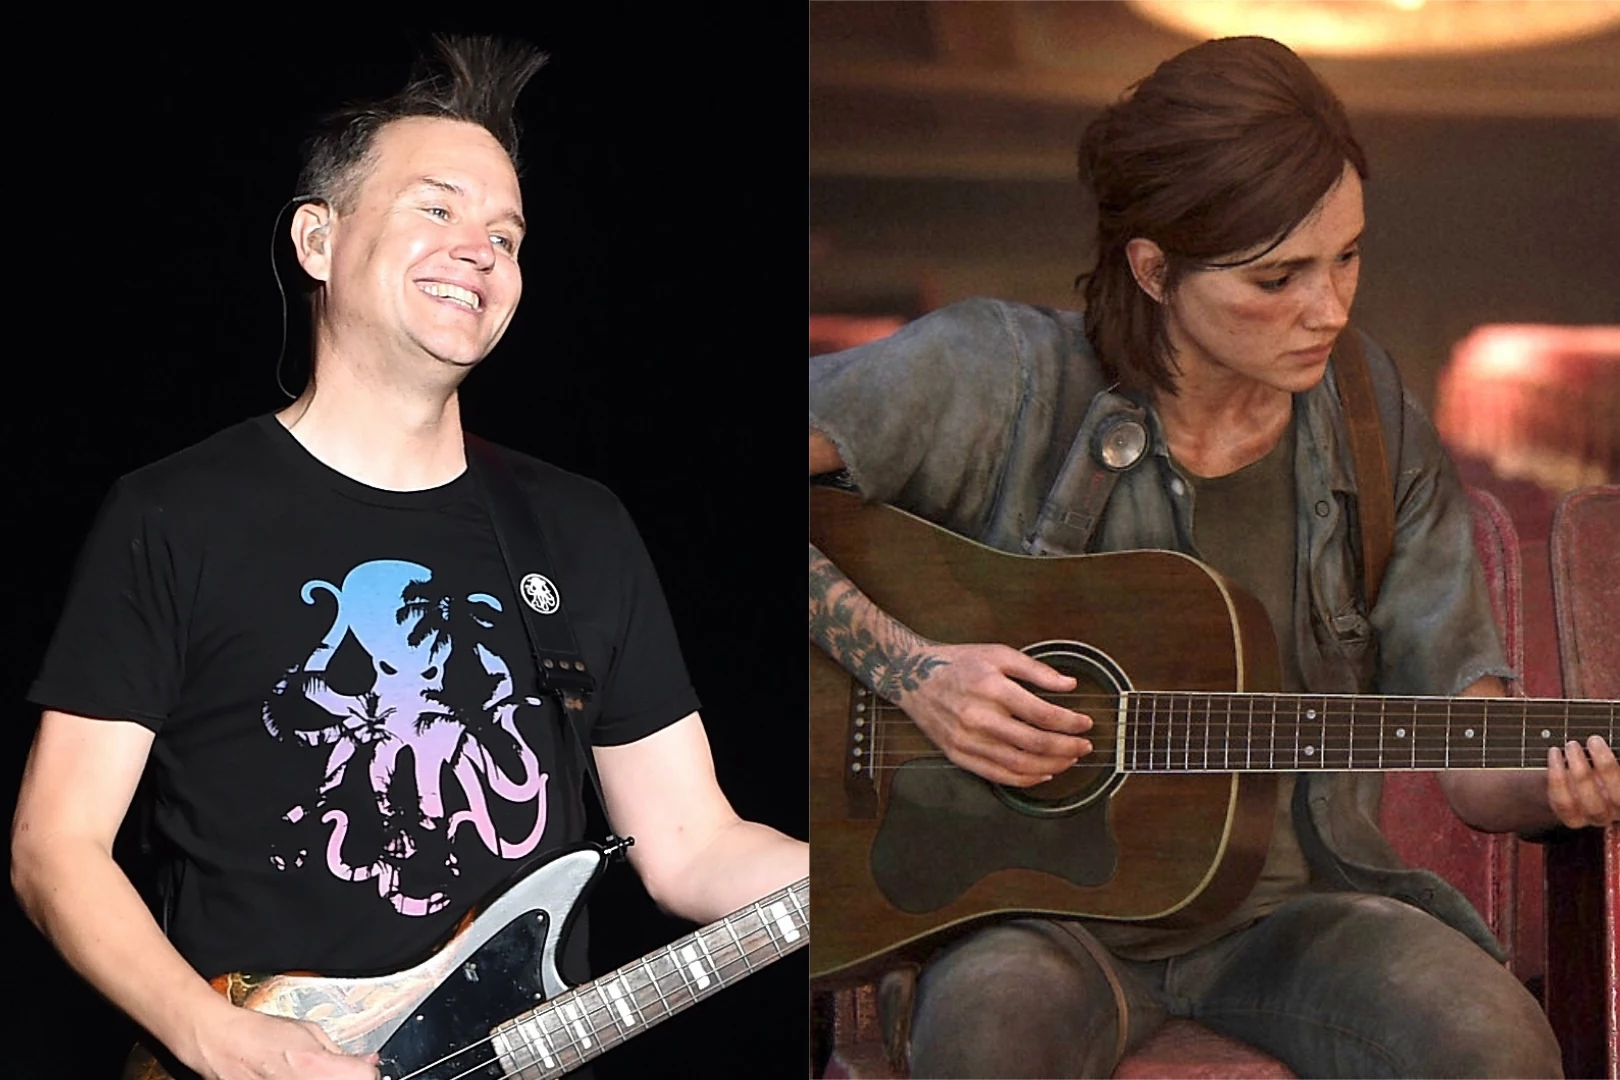 Blink 182's Mark Hoppus performs their song Dammit on Ellie's guitar : r/PS4